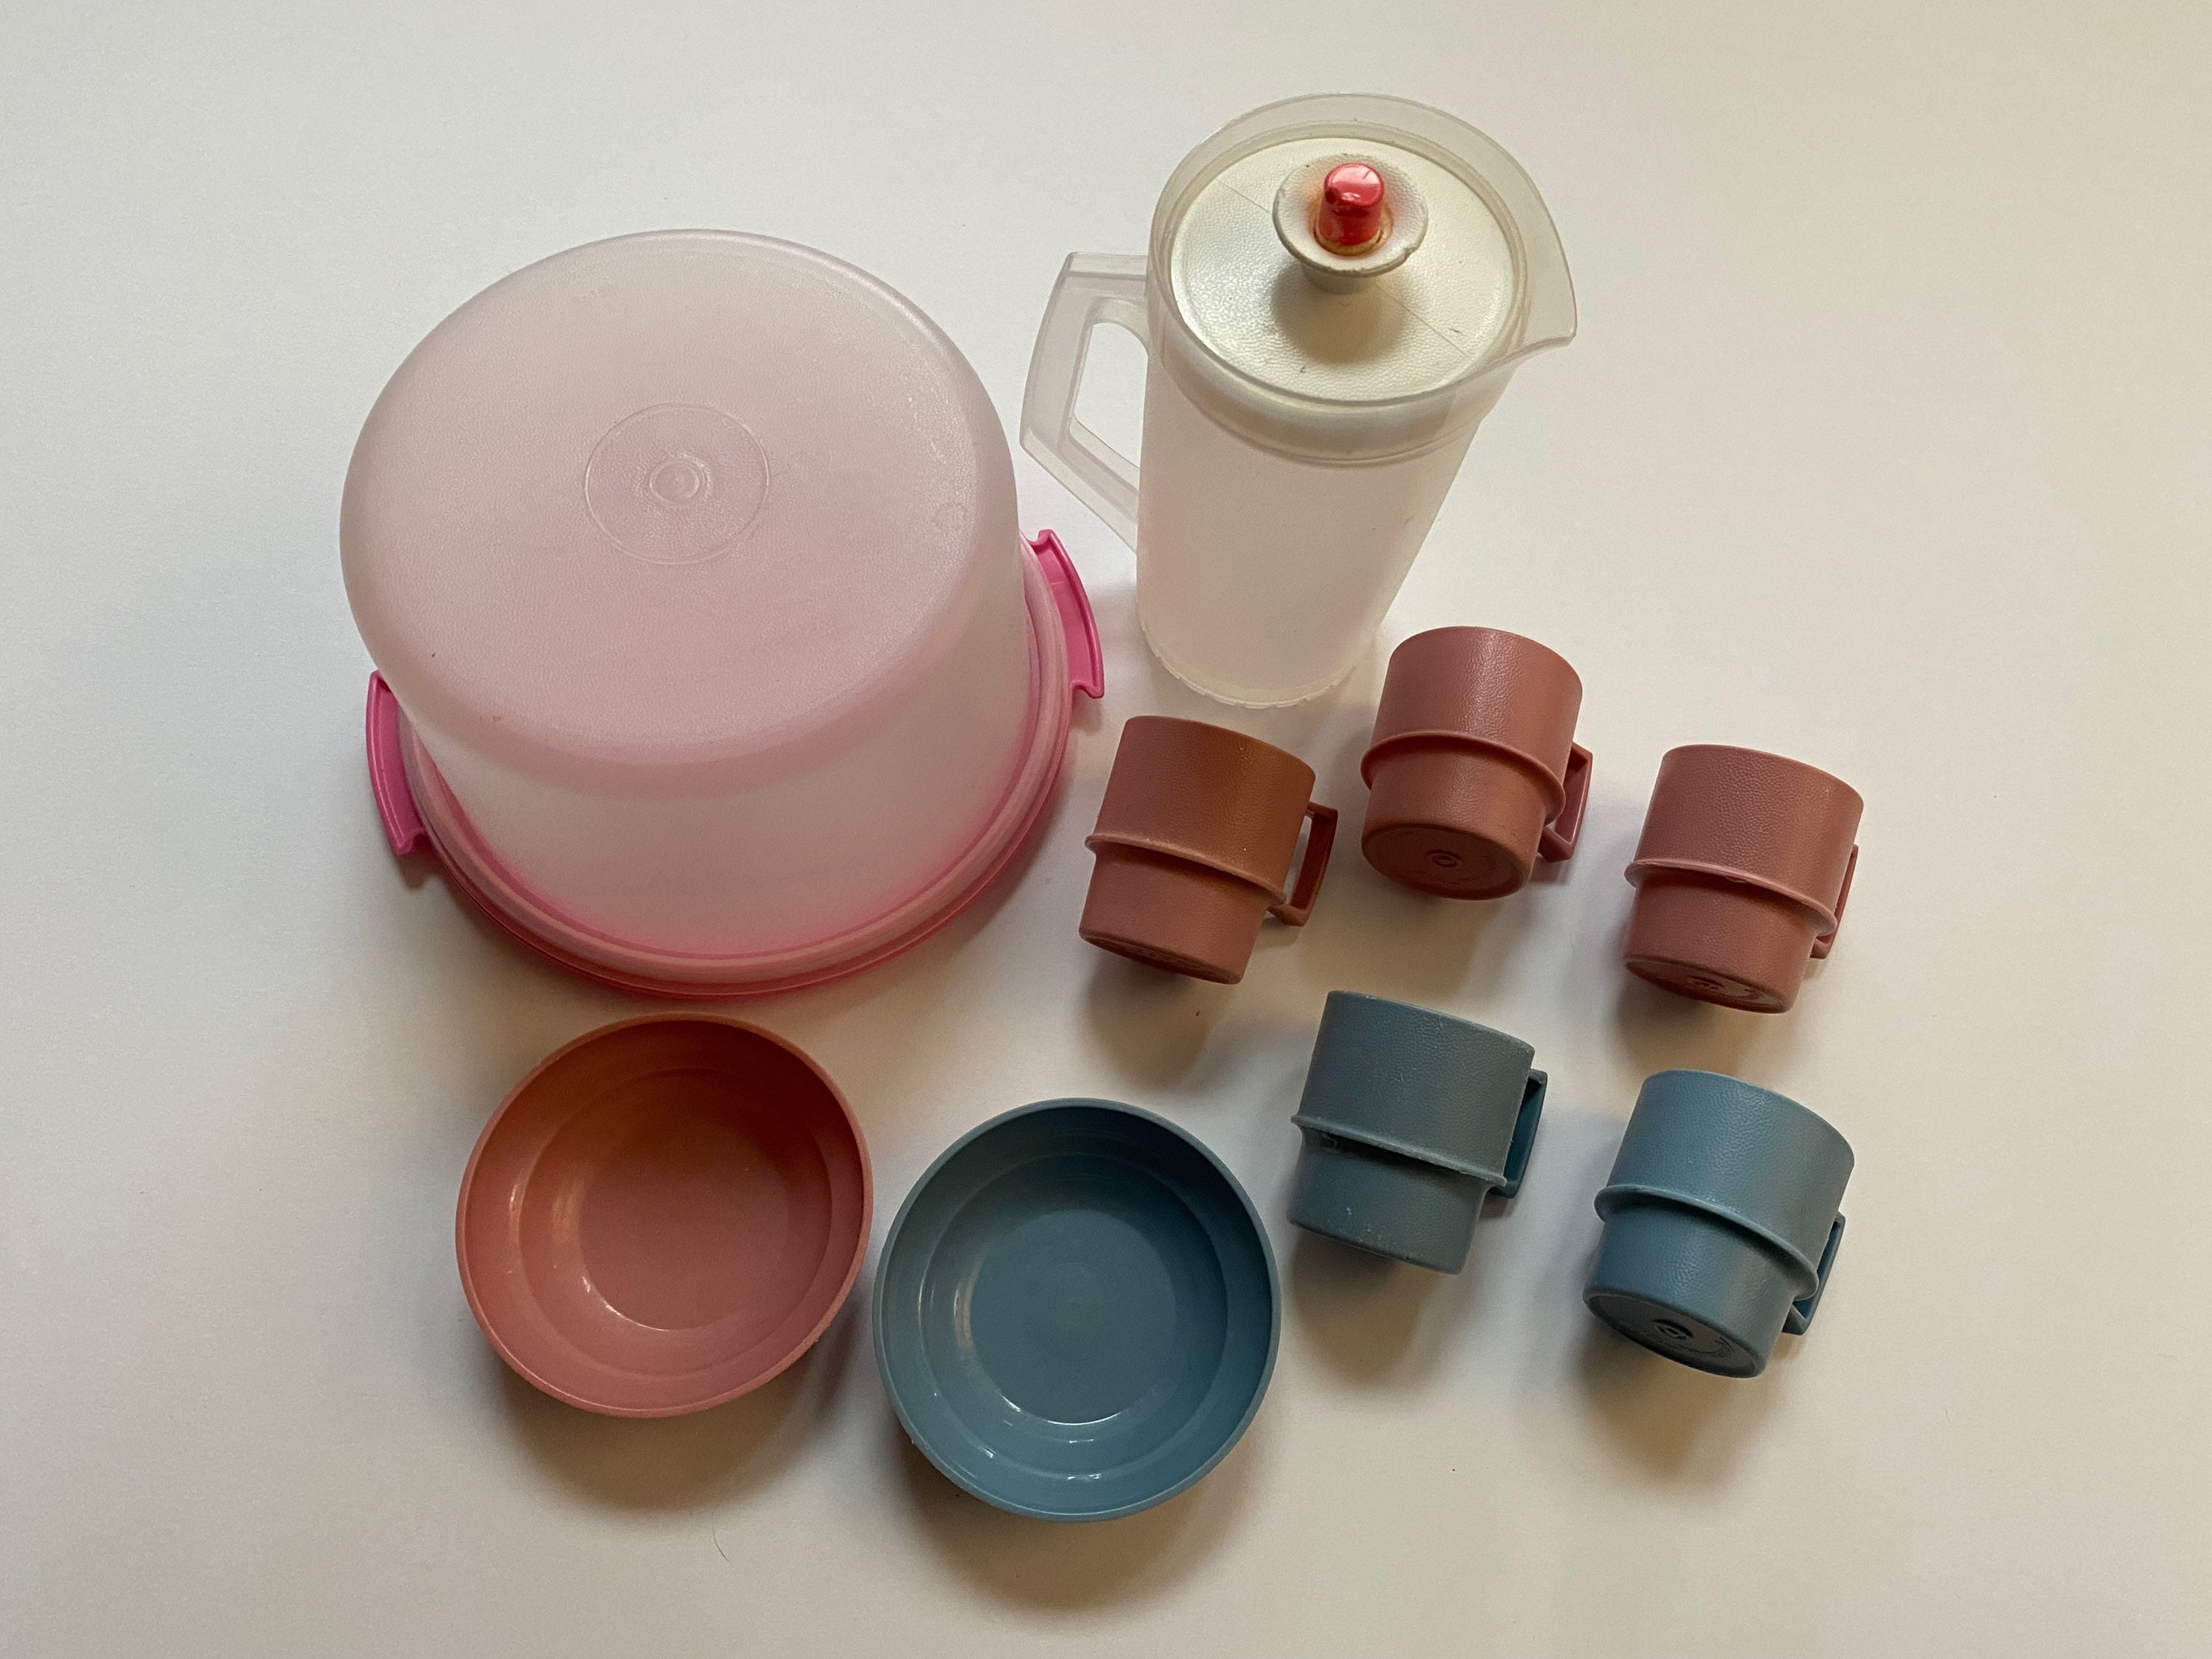 Toy Tupperware Dishes Choice of Vintage Replacement 